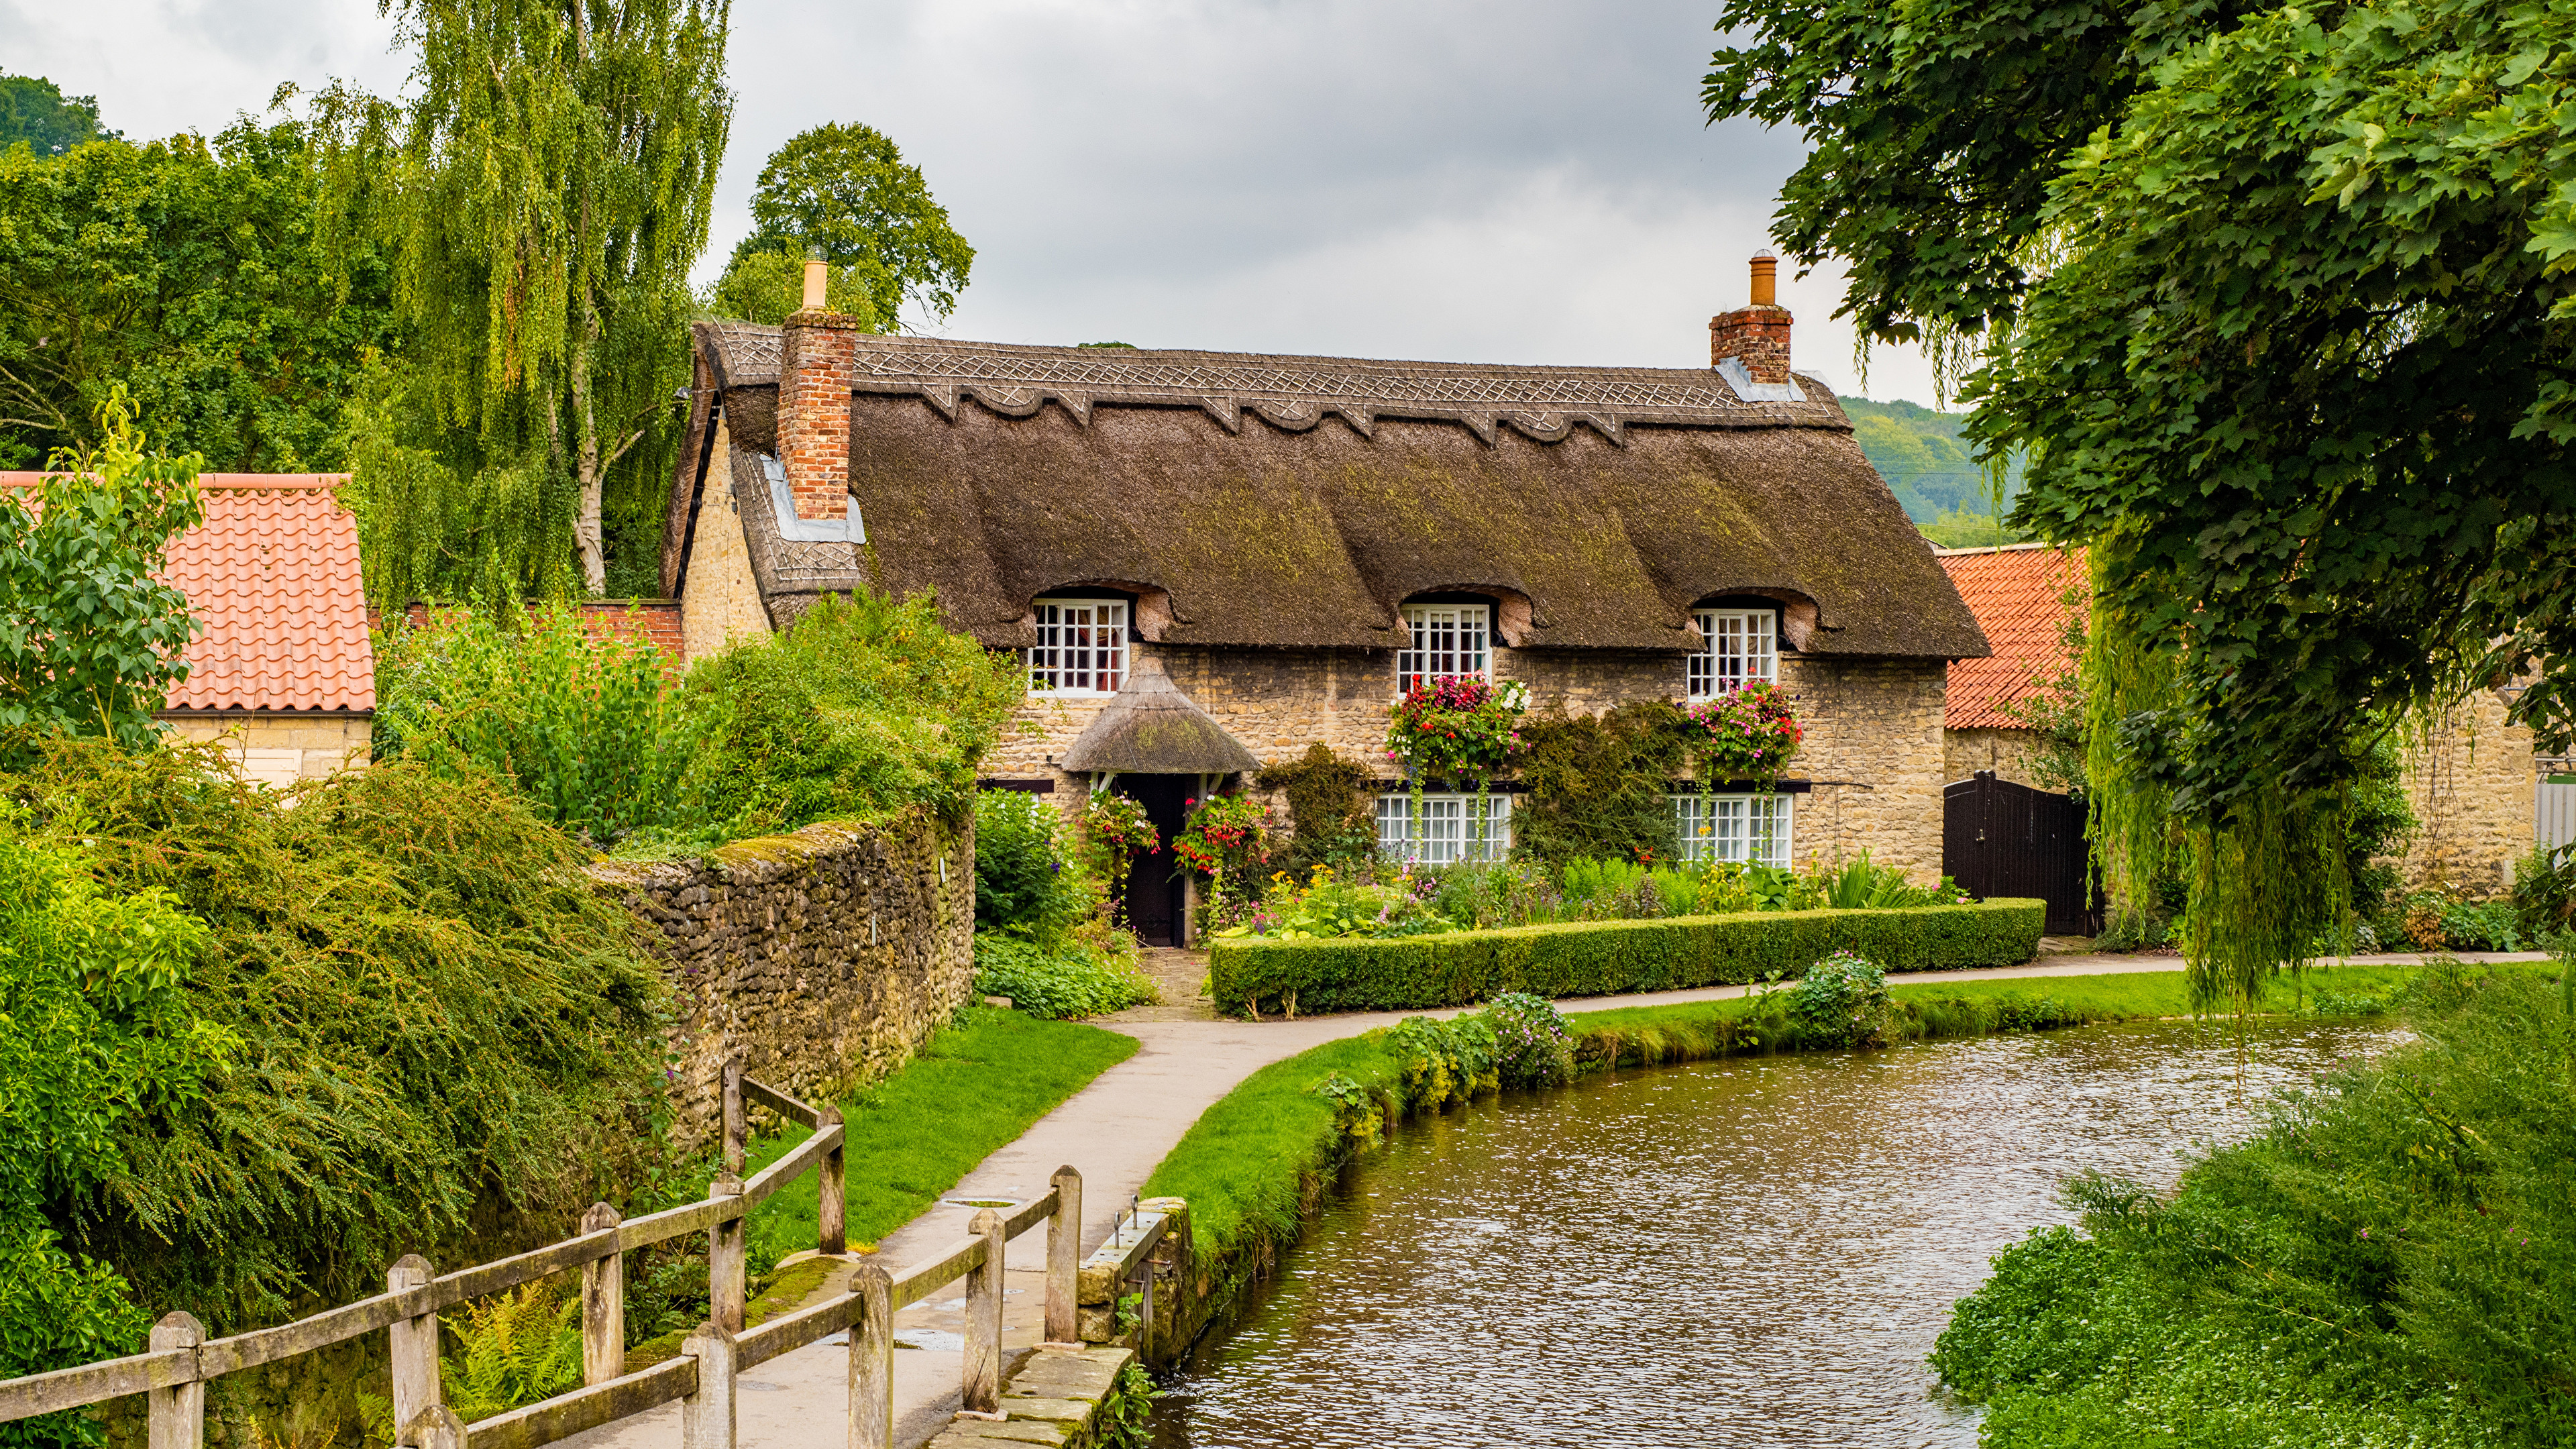 Beautiful old house by a water channel england desktop wallpapers x